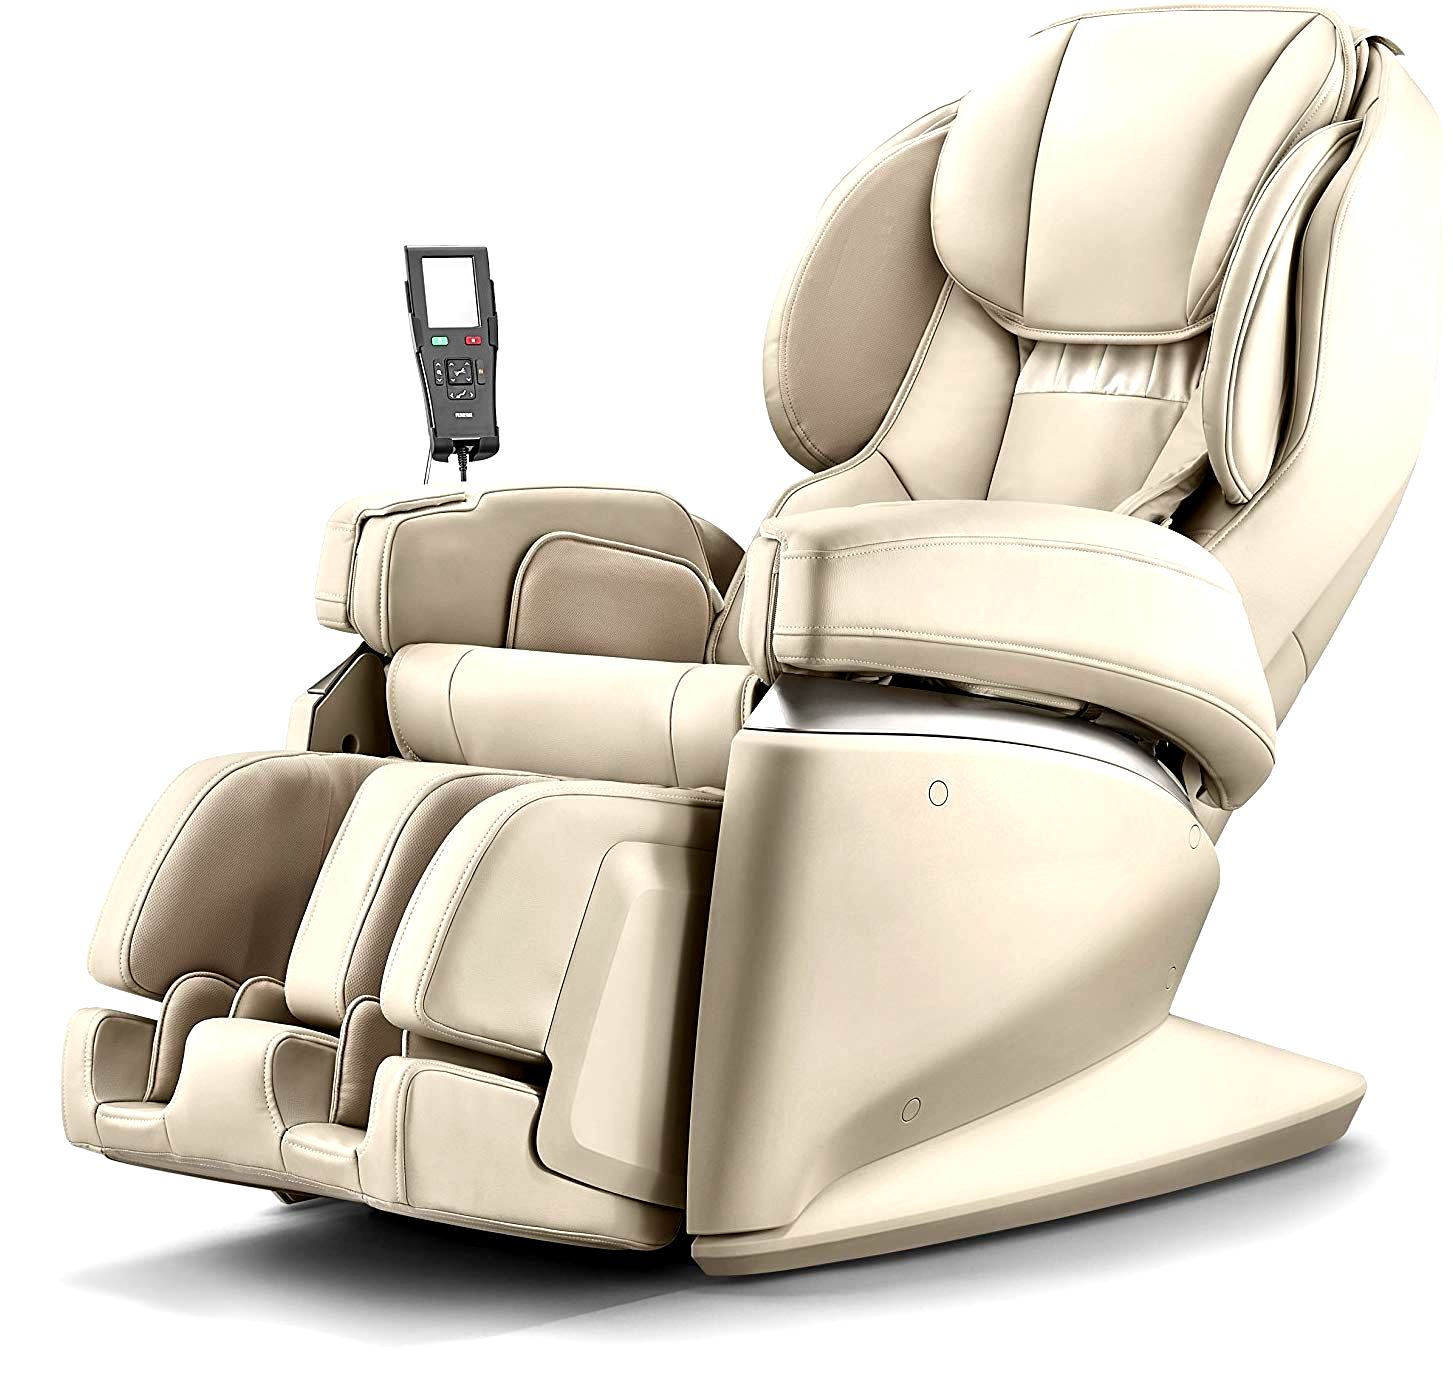 5 Best Japanese Massage Chairs 2021 Review 1 Top Brand